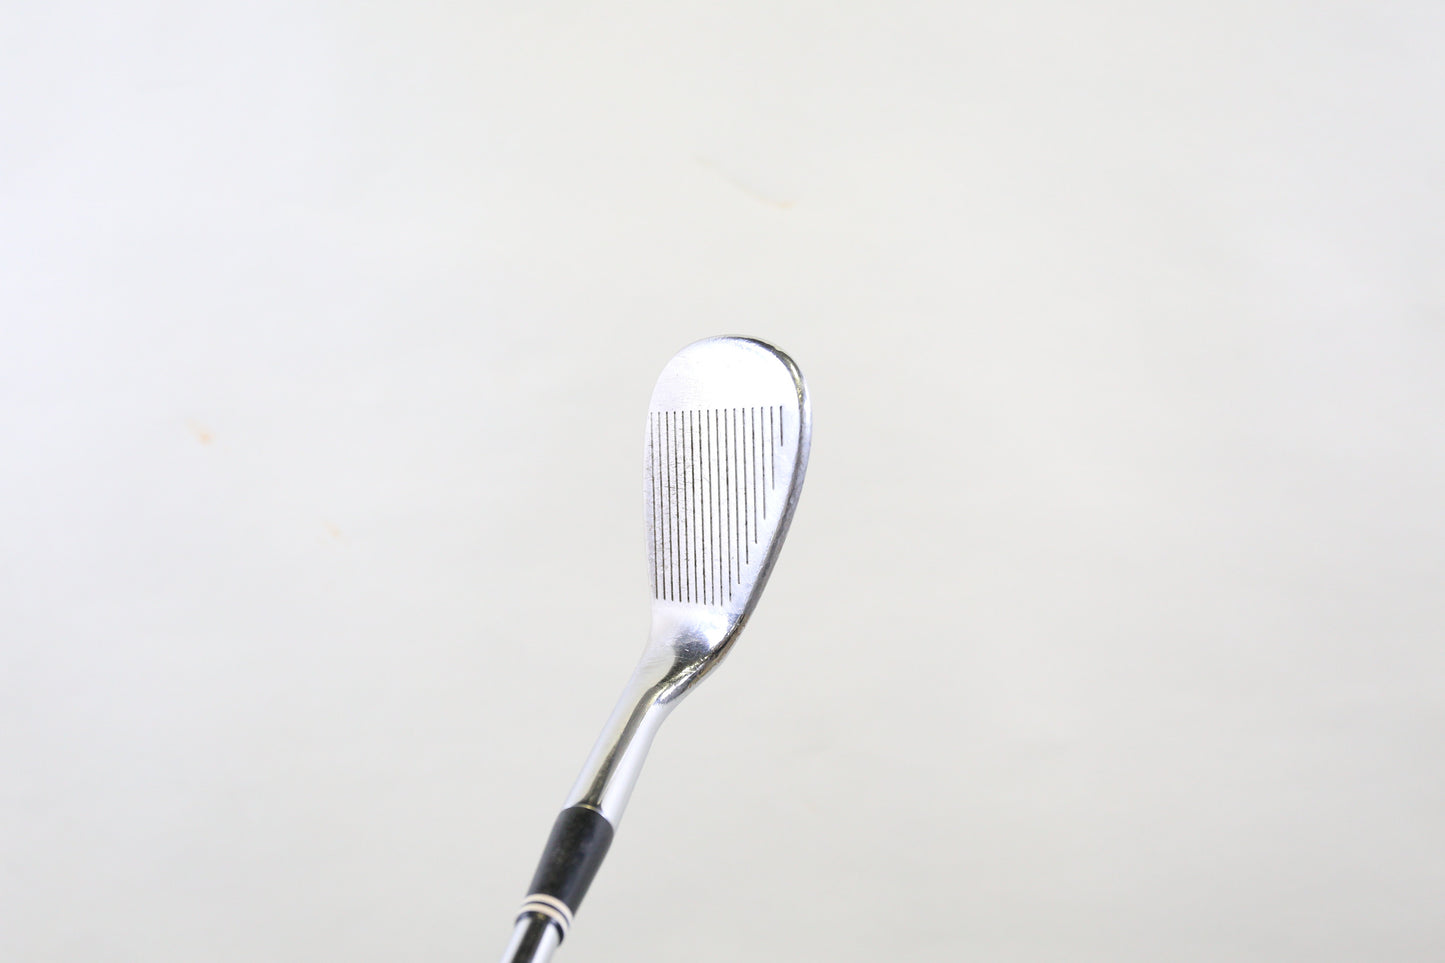 Used Cleveland 588 Tour Action TS Sand Wedge - Right-Handed - 57 Degrees - Stiff Flex